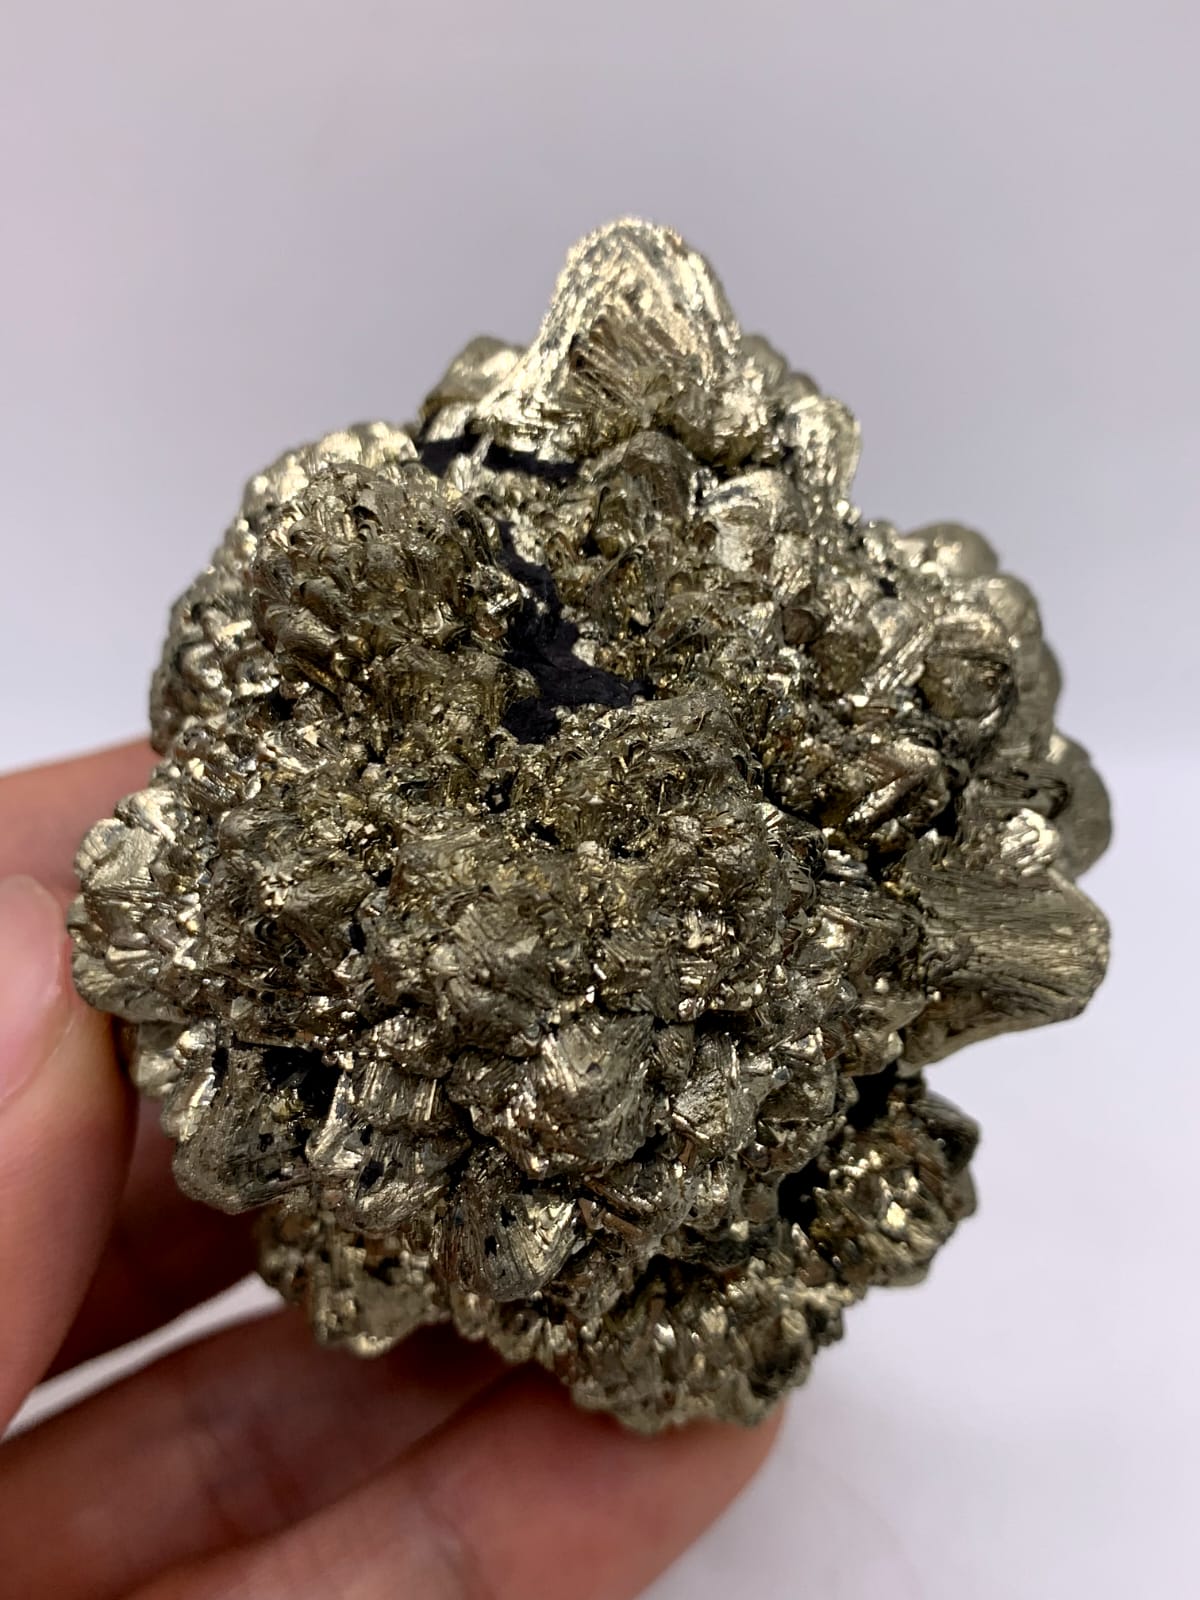 Gorgeous Dendritic Marcasite With Magnificent Golden Metallic luster